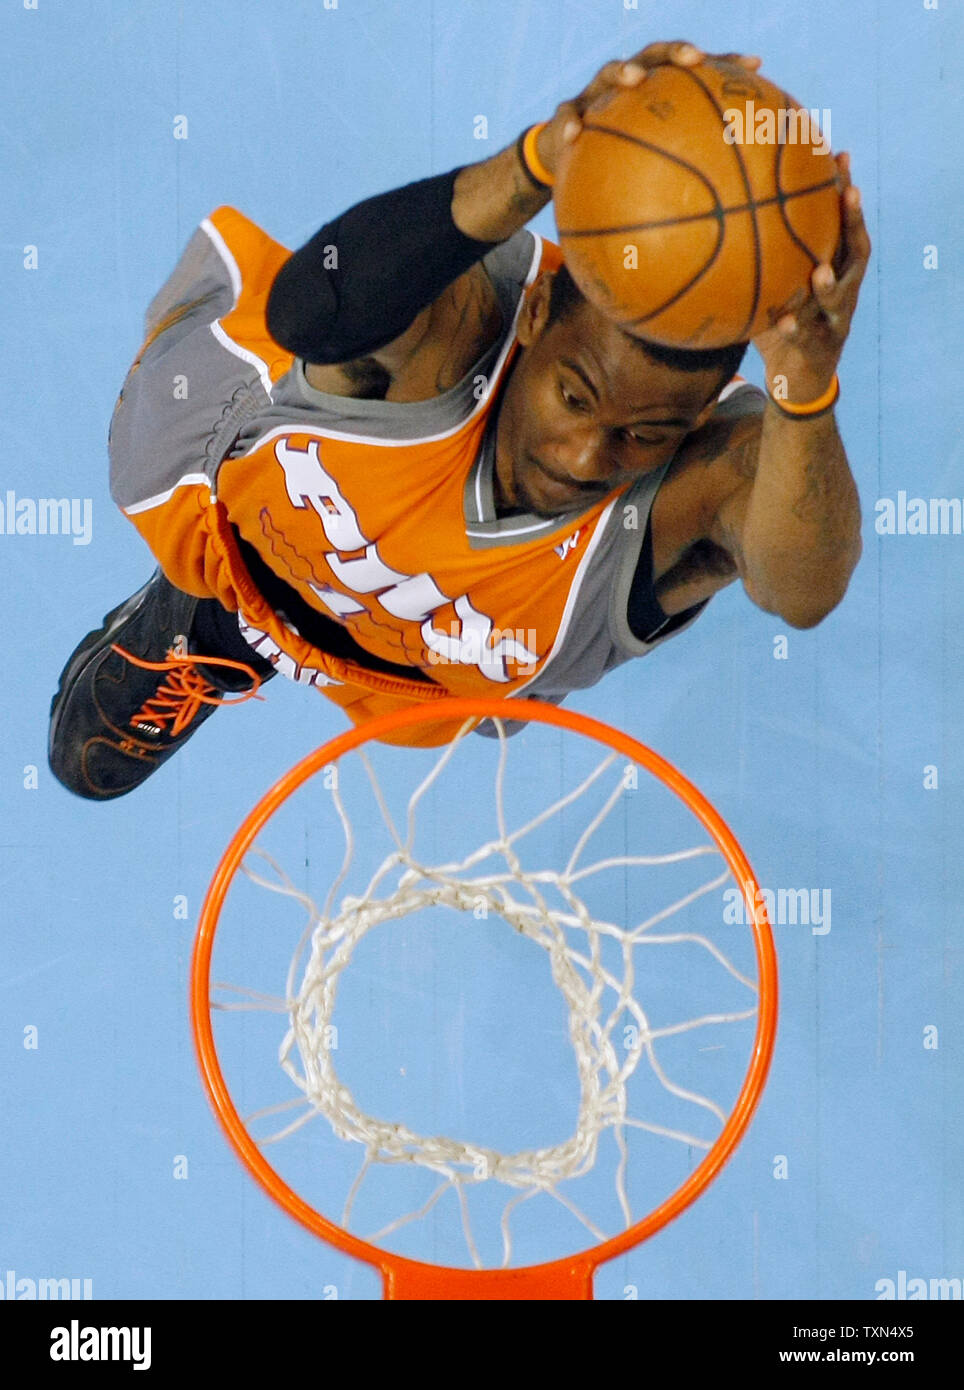 Phoenix Suns forward Amare Stoudemire dunks against the Denver Nuggets during the first quarter at the Pepsi Center in Denver on April 1, 2008.  Denver beat Phoenix 126-120.    (UPI Photo/Gary C. Caskey) Stock Photo